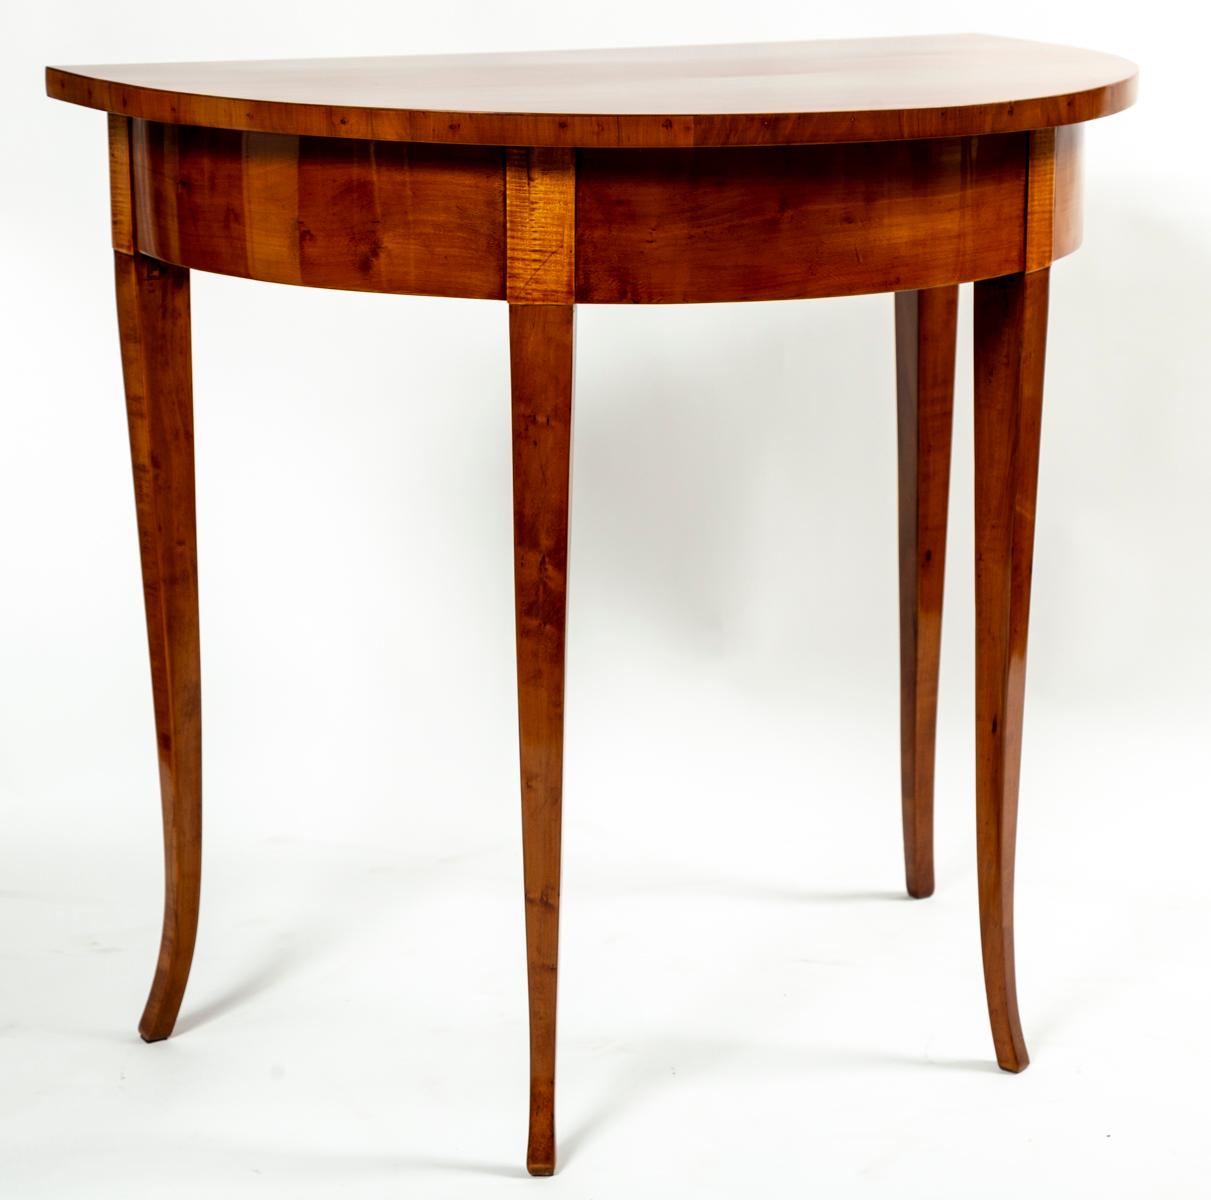 Early 19th Century Biedermeier Demilune Pearwood Console In Good Condition For Sale In Westport, CT